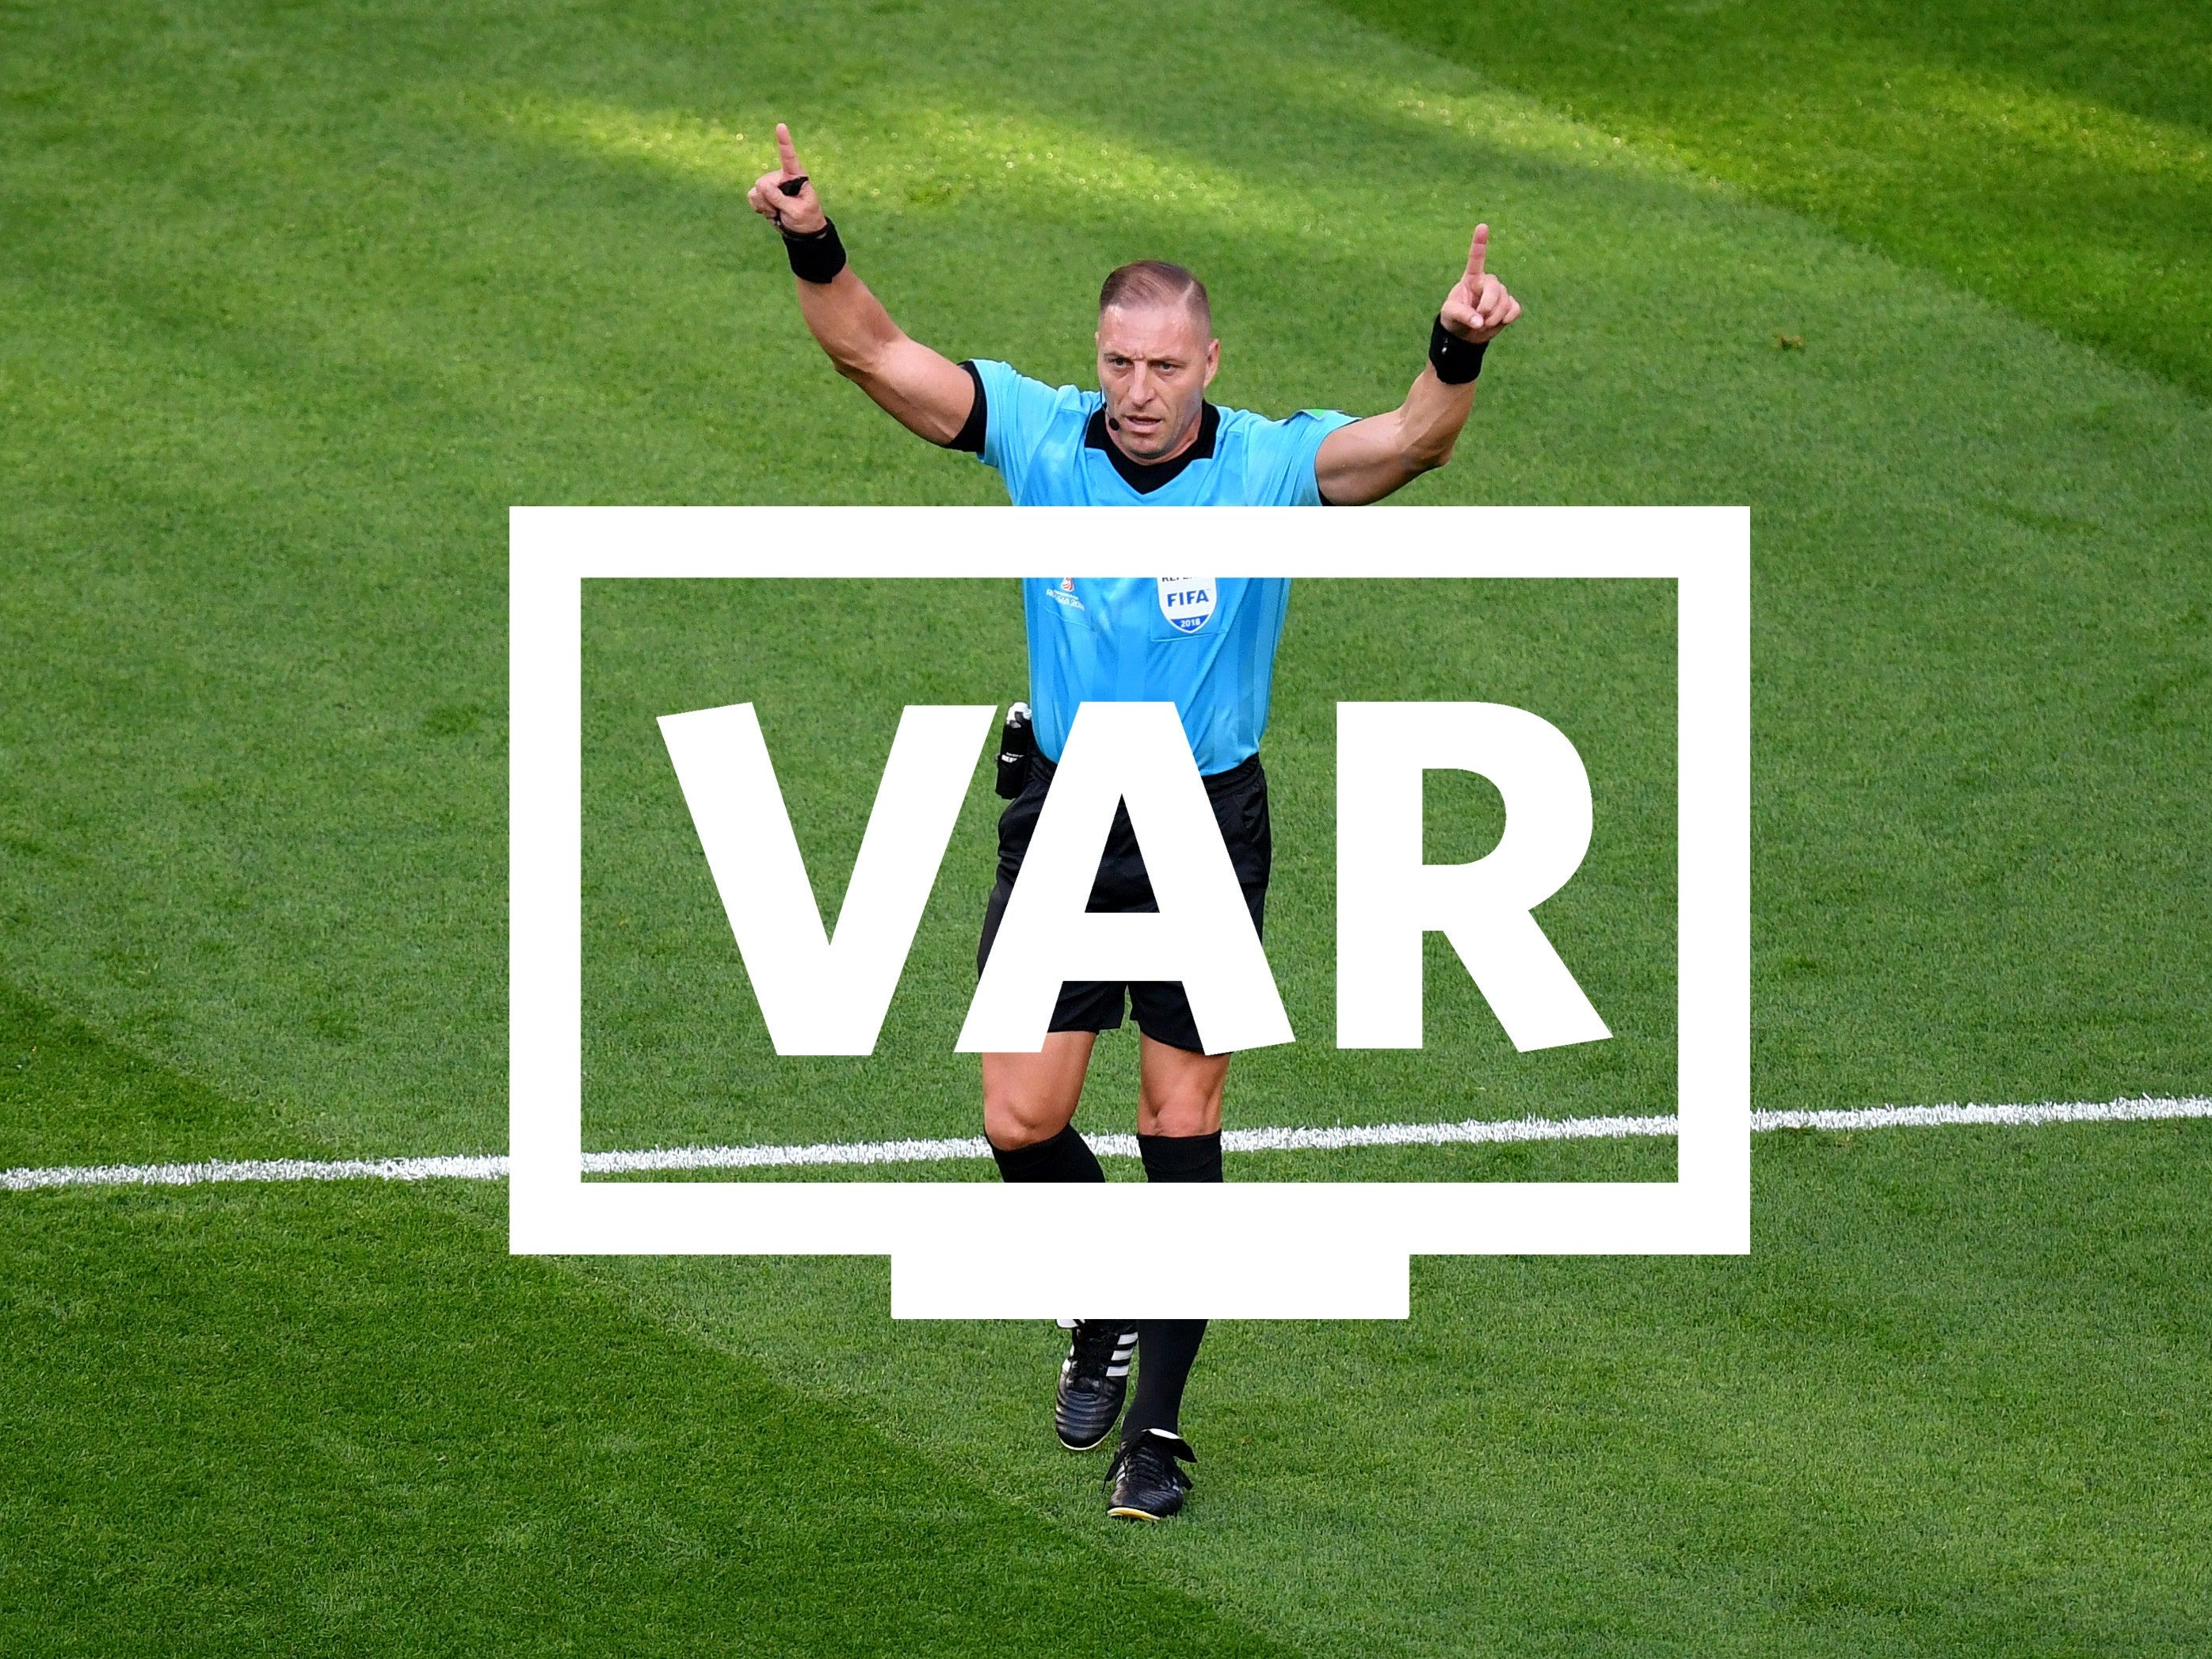 EURO 2020 starts today and VAR will make sure it's fair